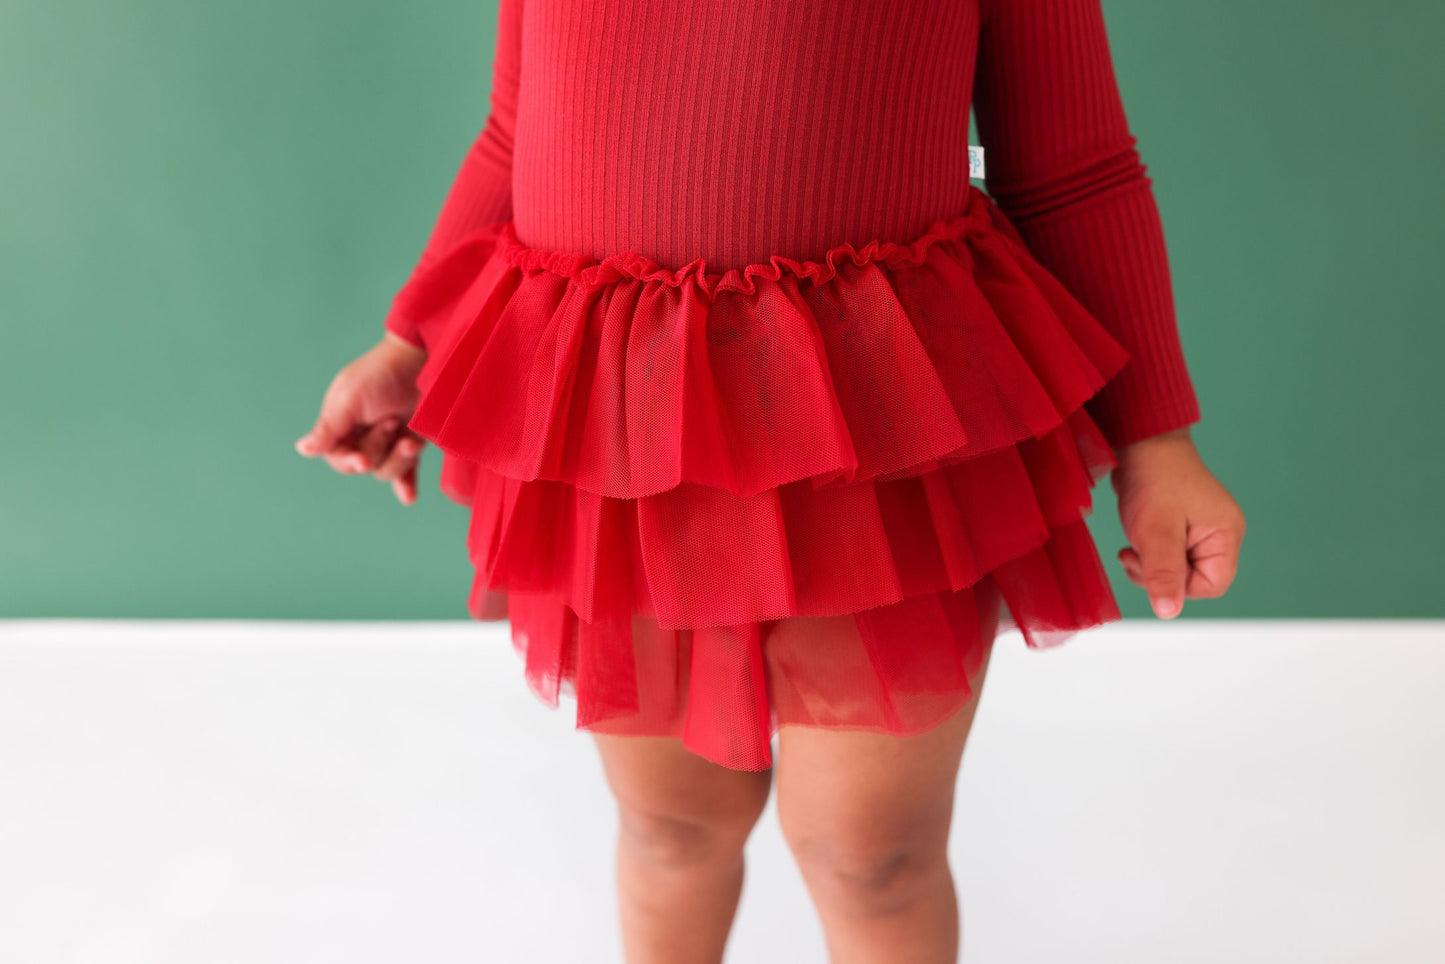 Load image into Gallery viewer, Posh Peanut Dark Red Solid Ribbed LS Tulle Skirt Bodysuit
